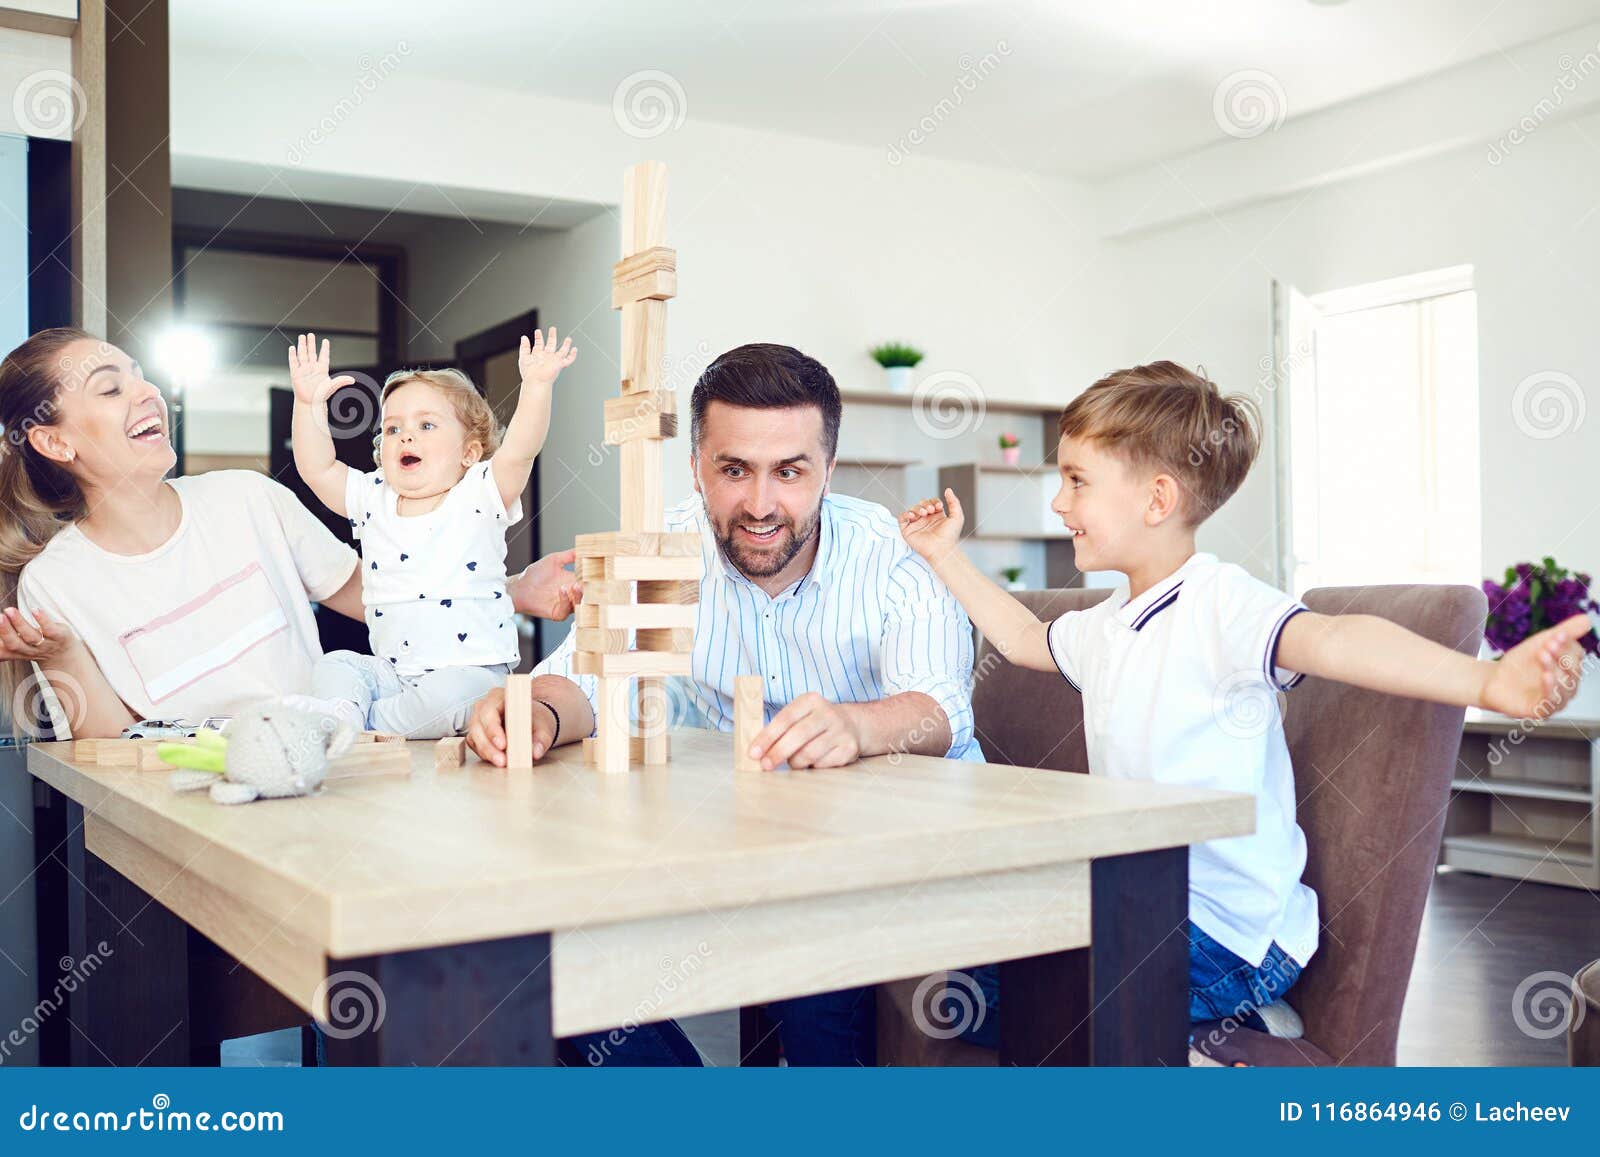 a family plays board games sitting at a table indoors.